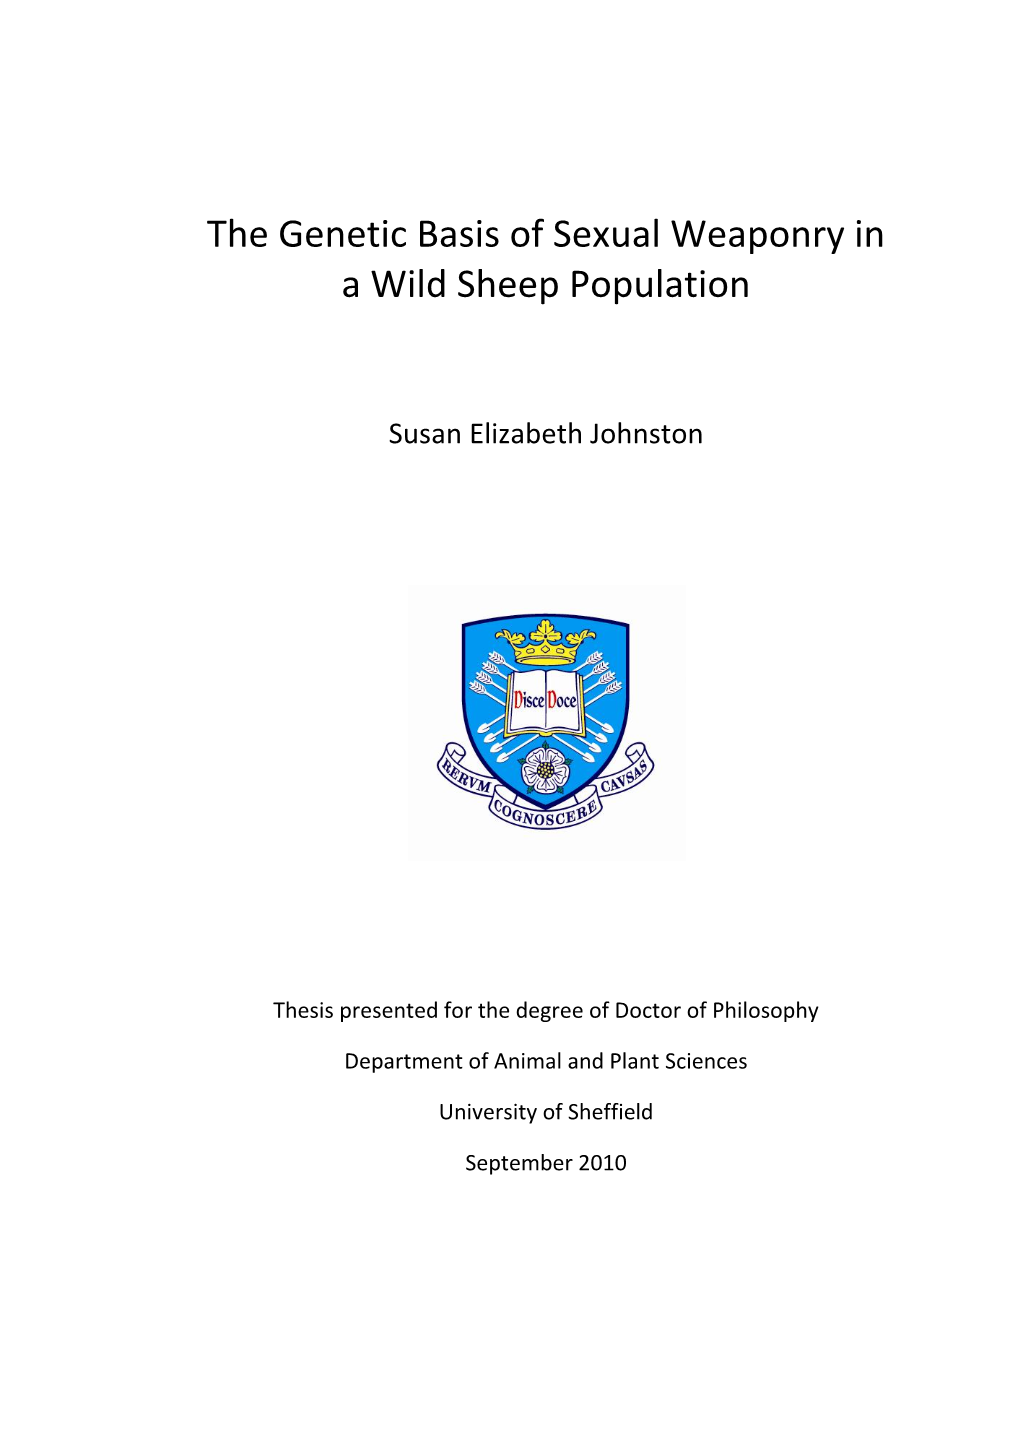 The Genetic Basis of Sexual Weaponry in a Wild Sheep Population